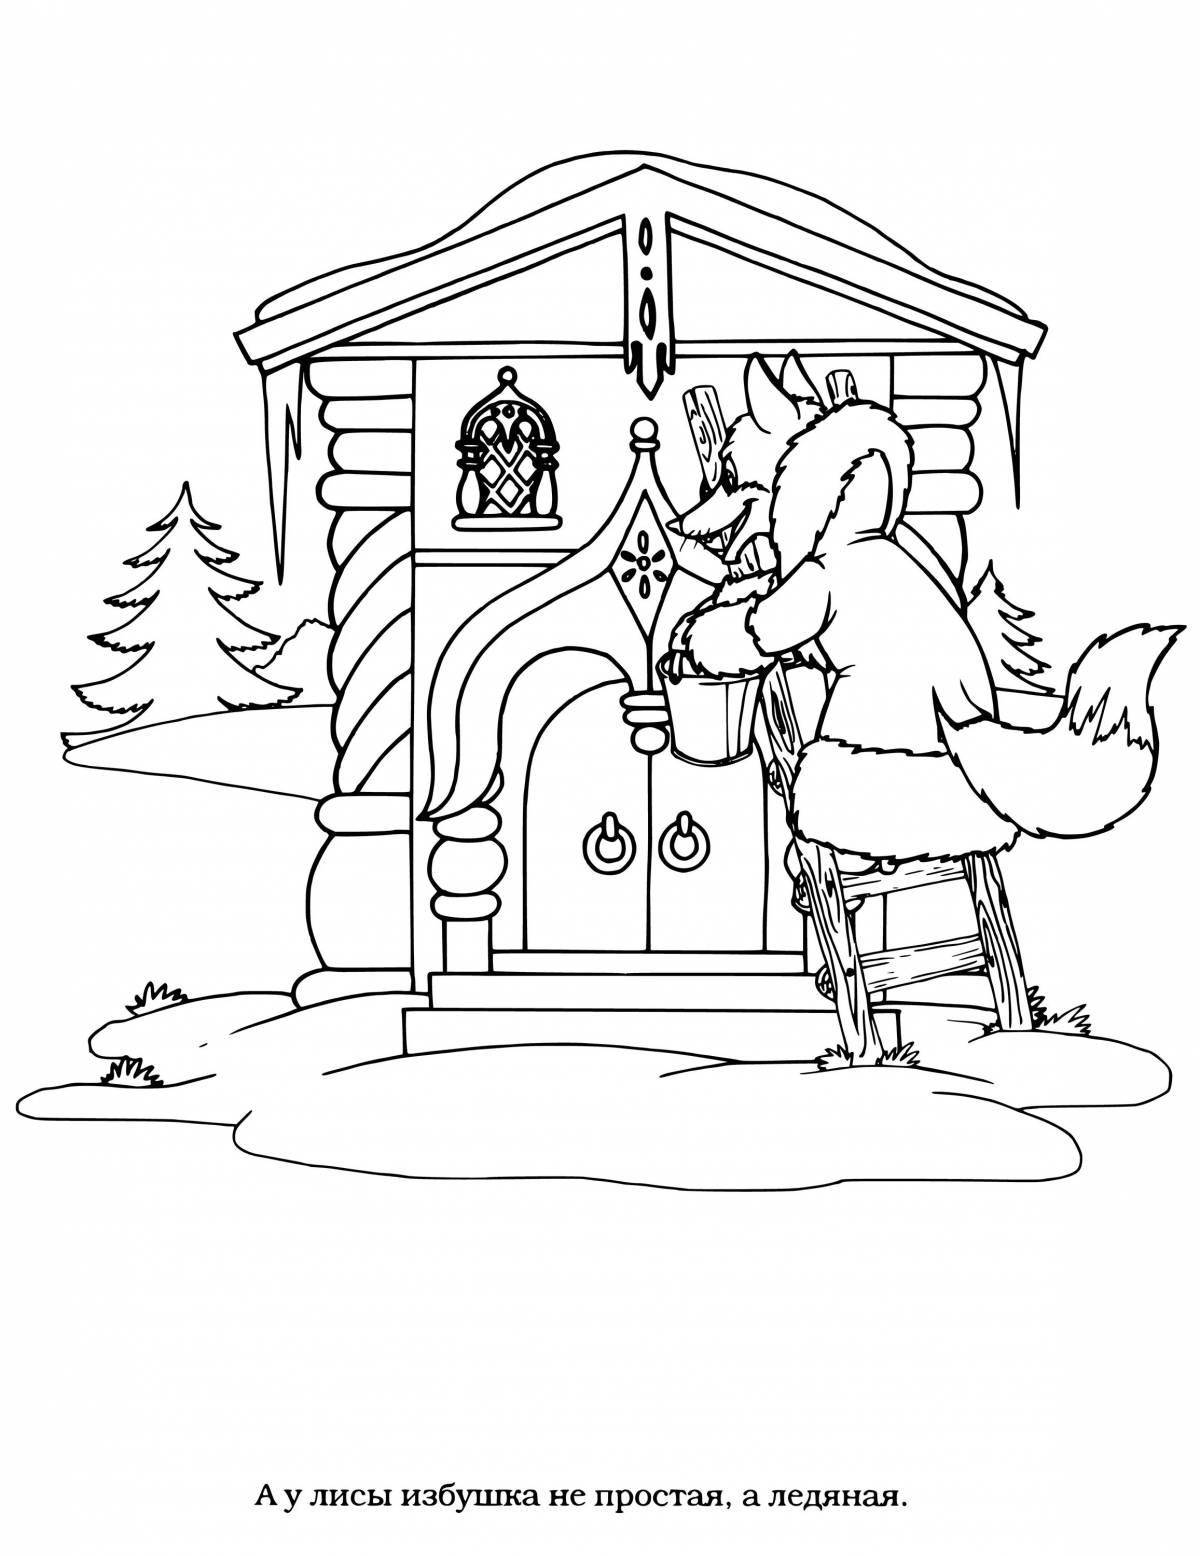 Large ice hut coloring page